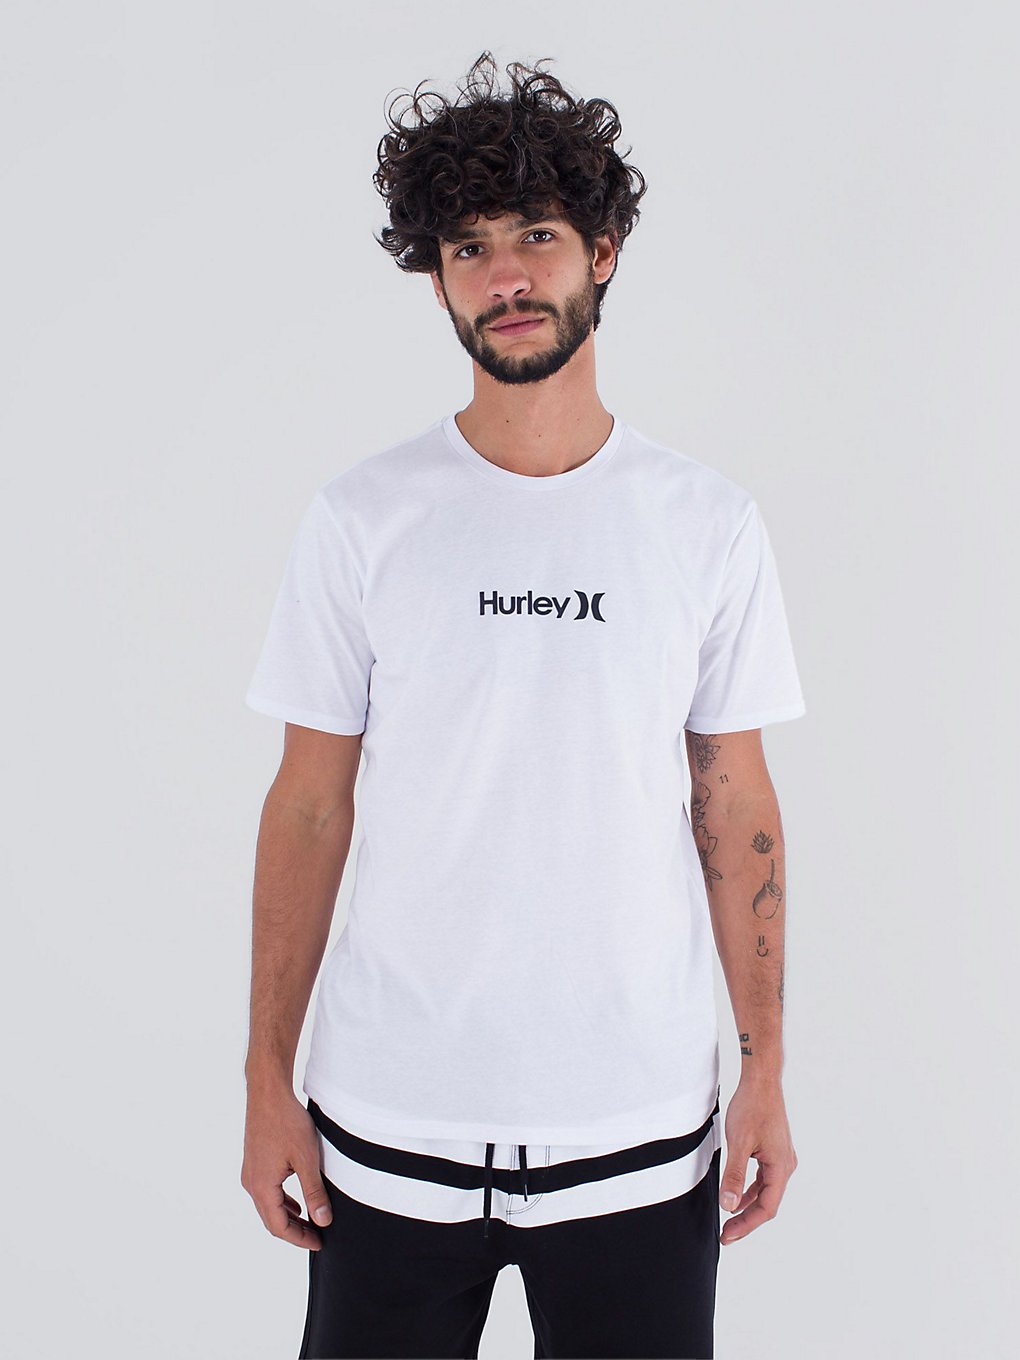 hurley h20 dri one & only t-shirt white